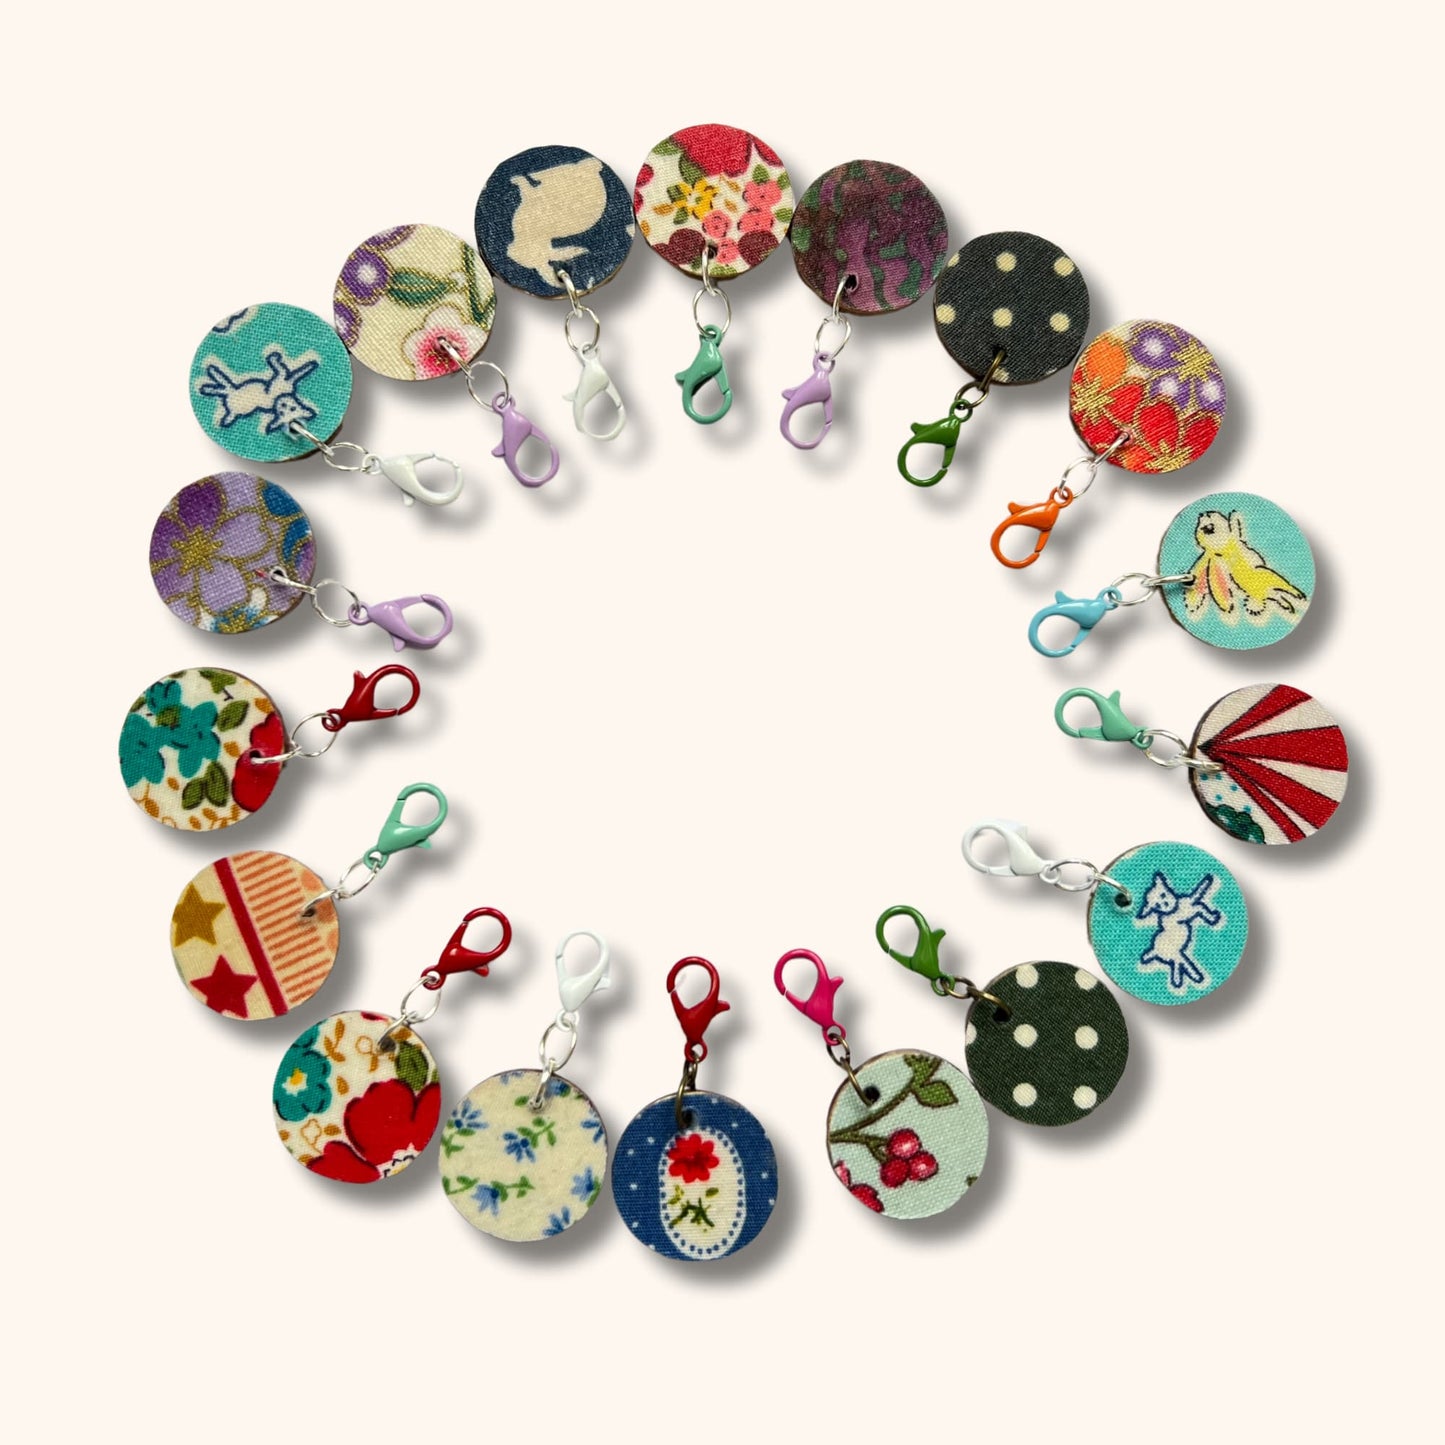 Stitch Marker Progress Keepers for Knitting and Crochet - Limited Edition Range